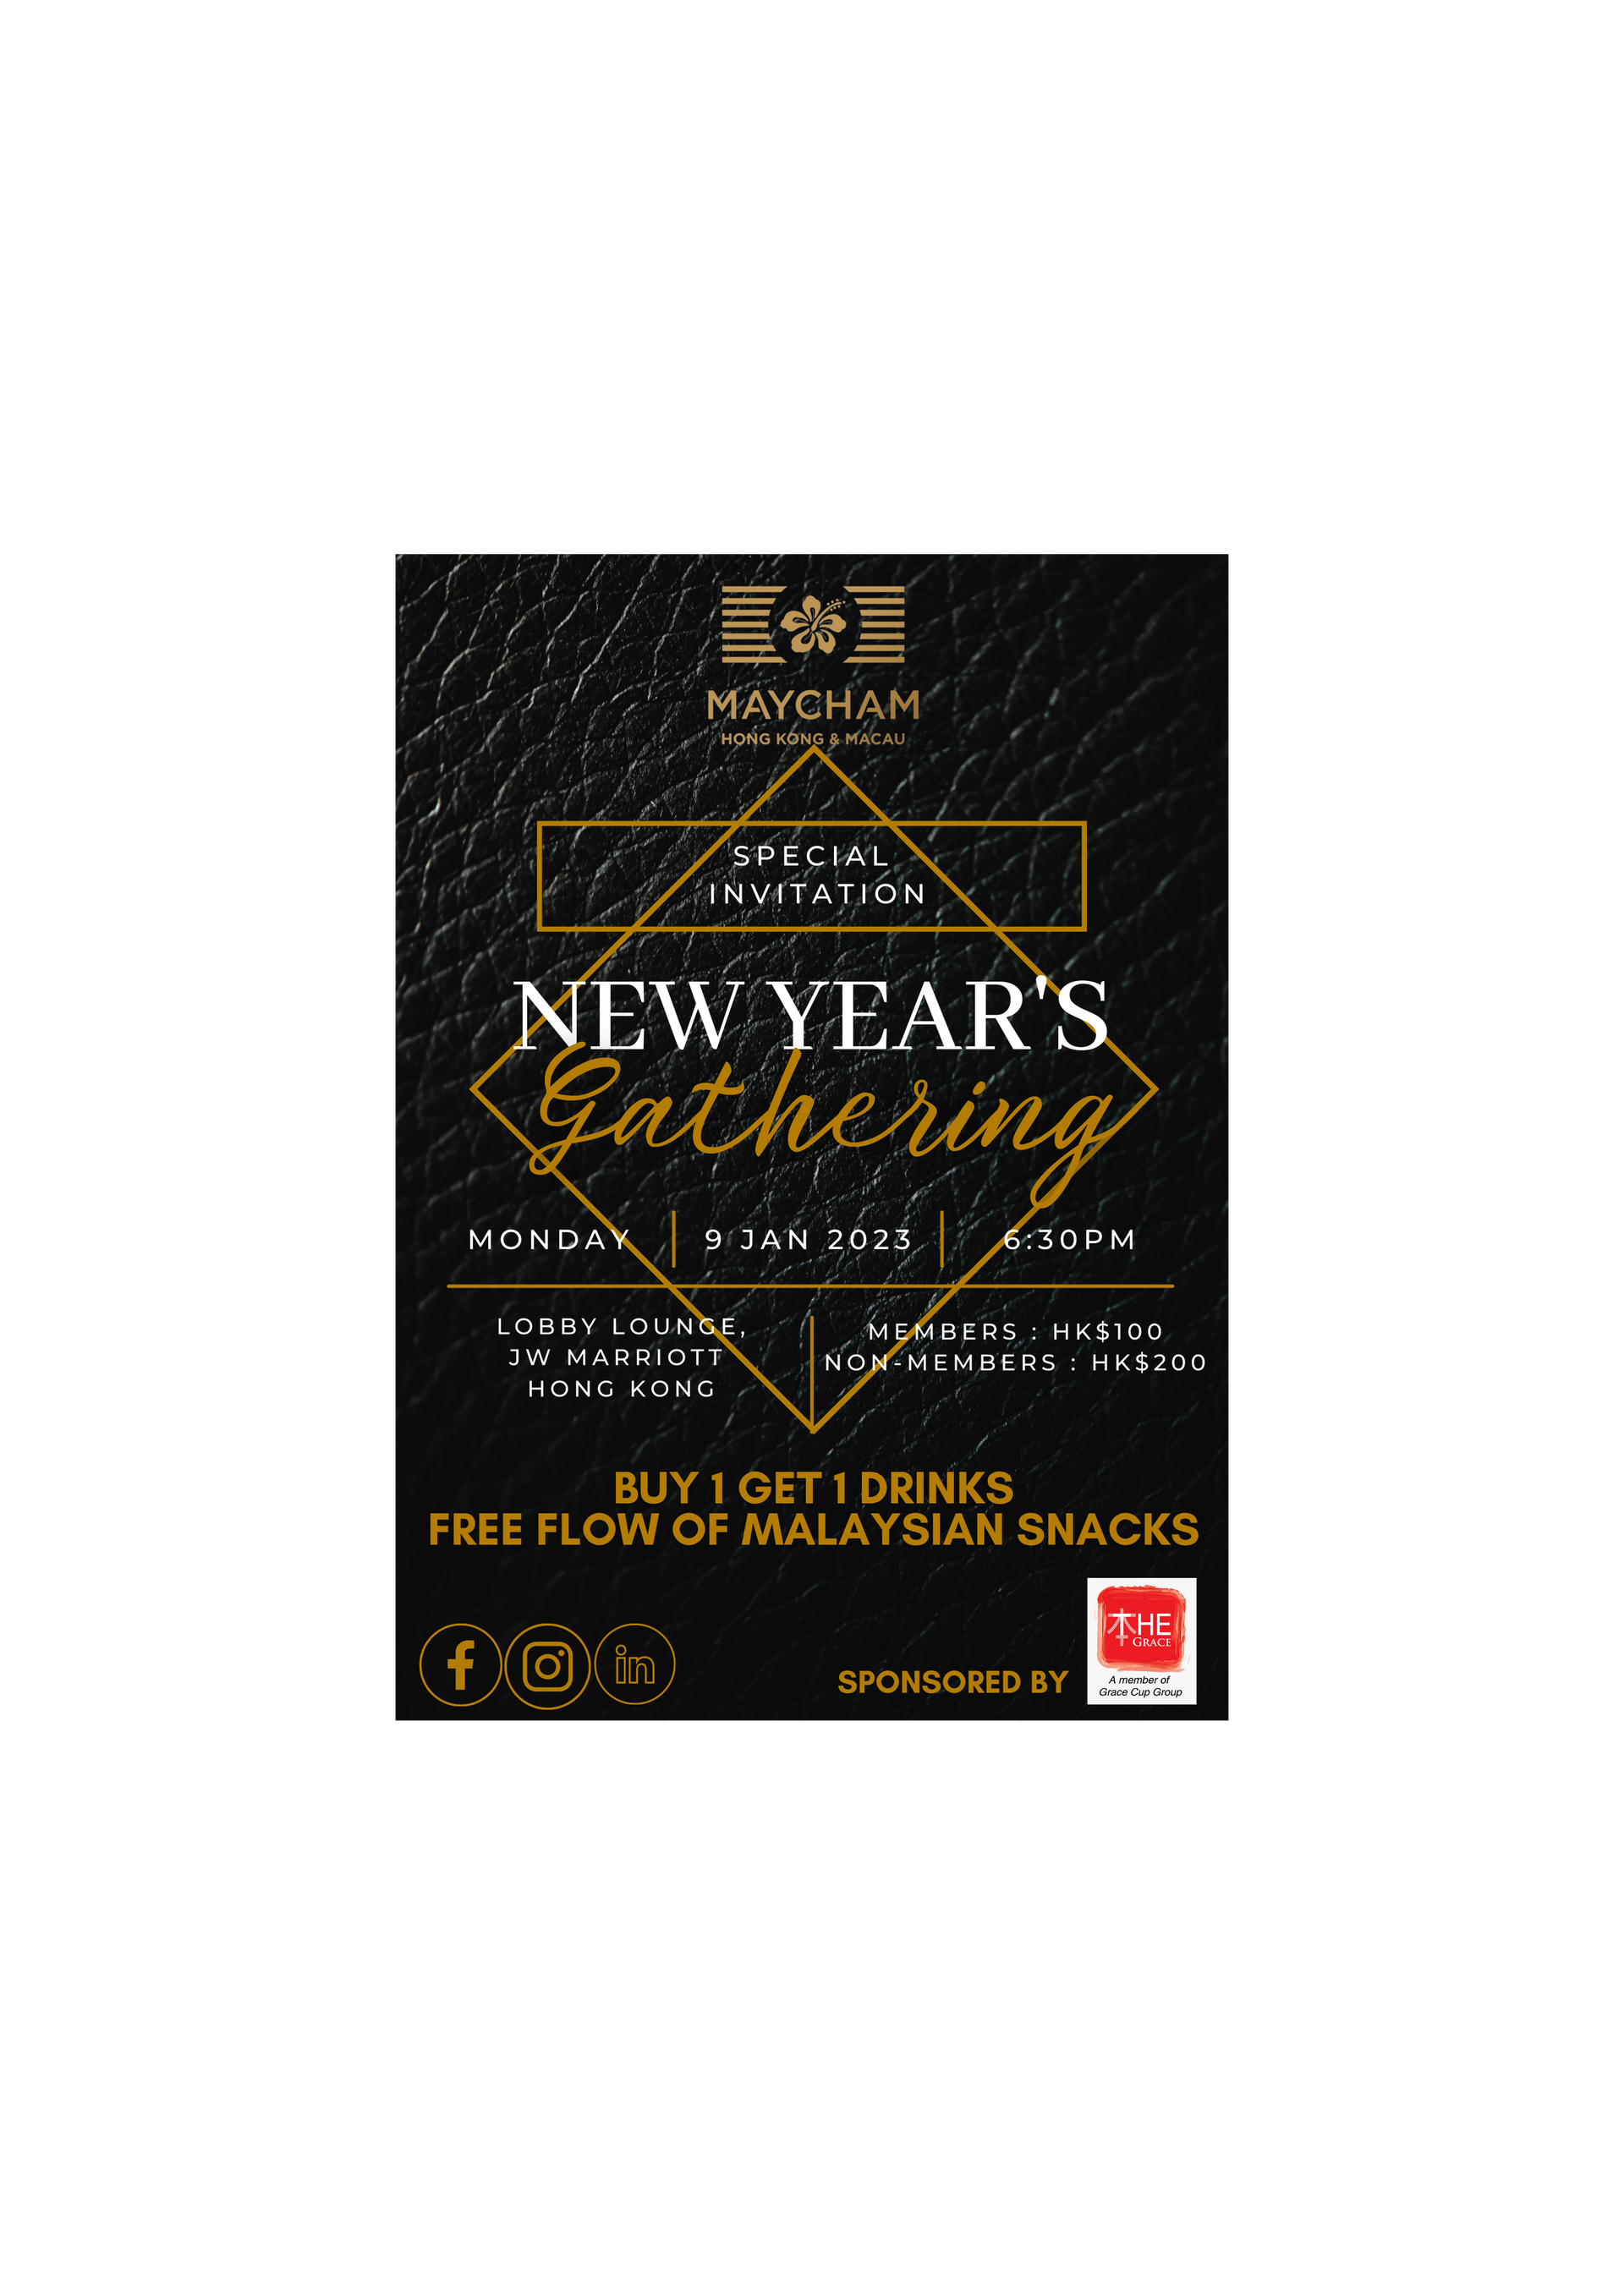 thumbnails MAYCHAM Special New Year Gathering 2023 - 9 Jan 630PM